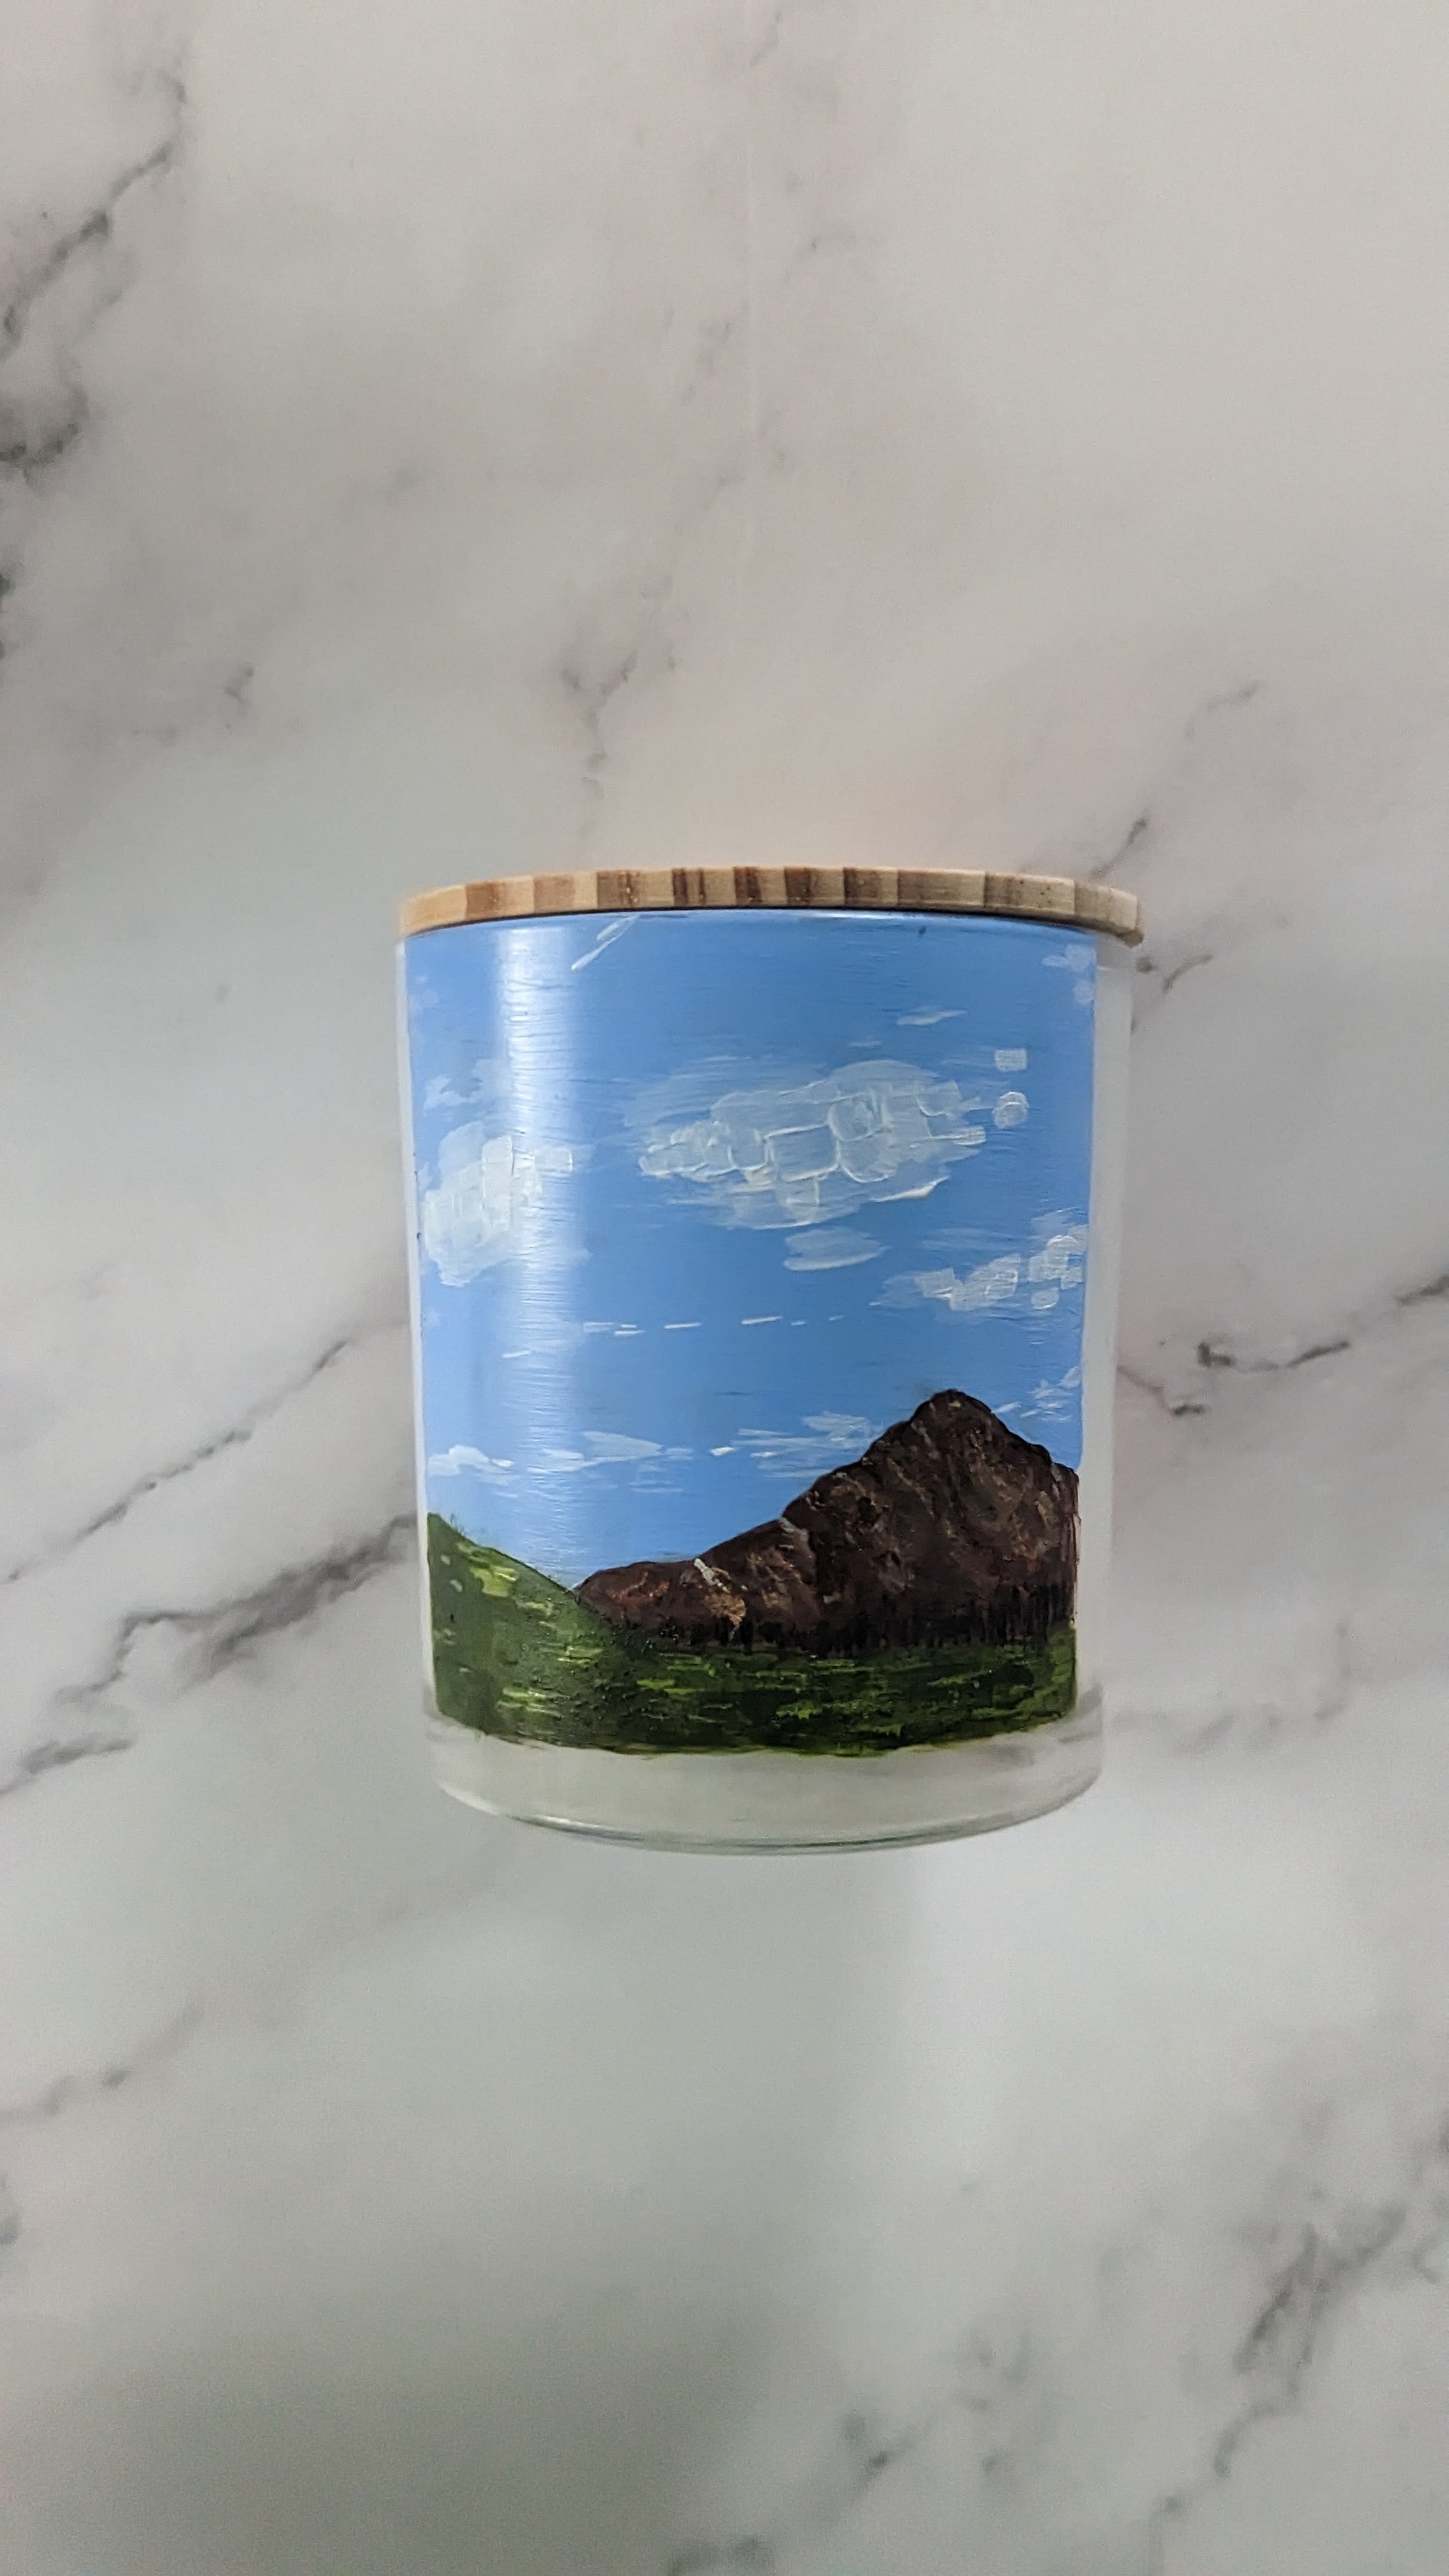 landscape mini painting on a candle.jpg